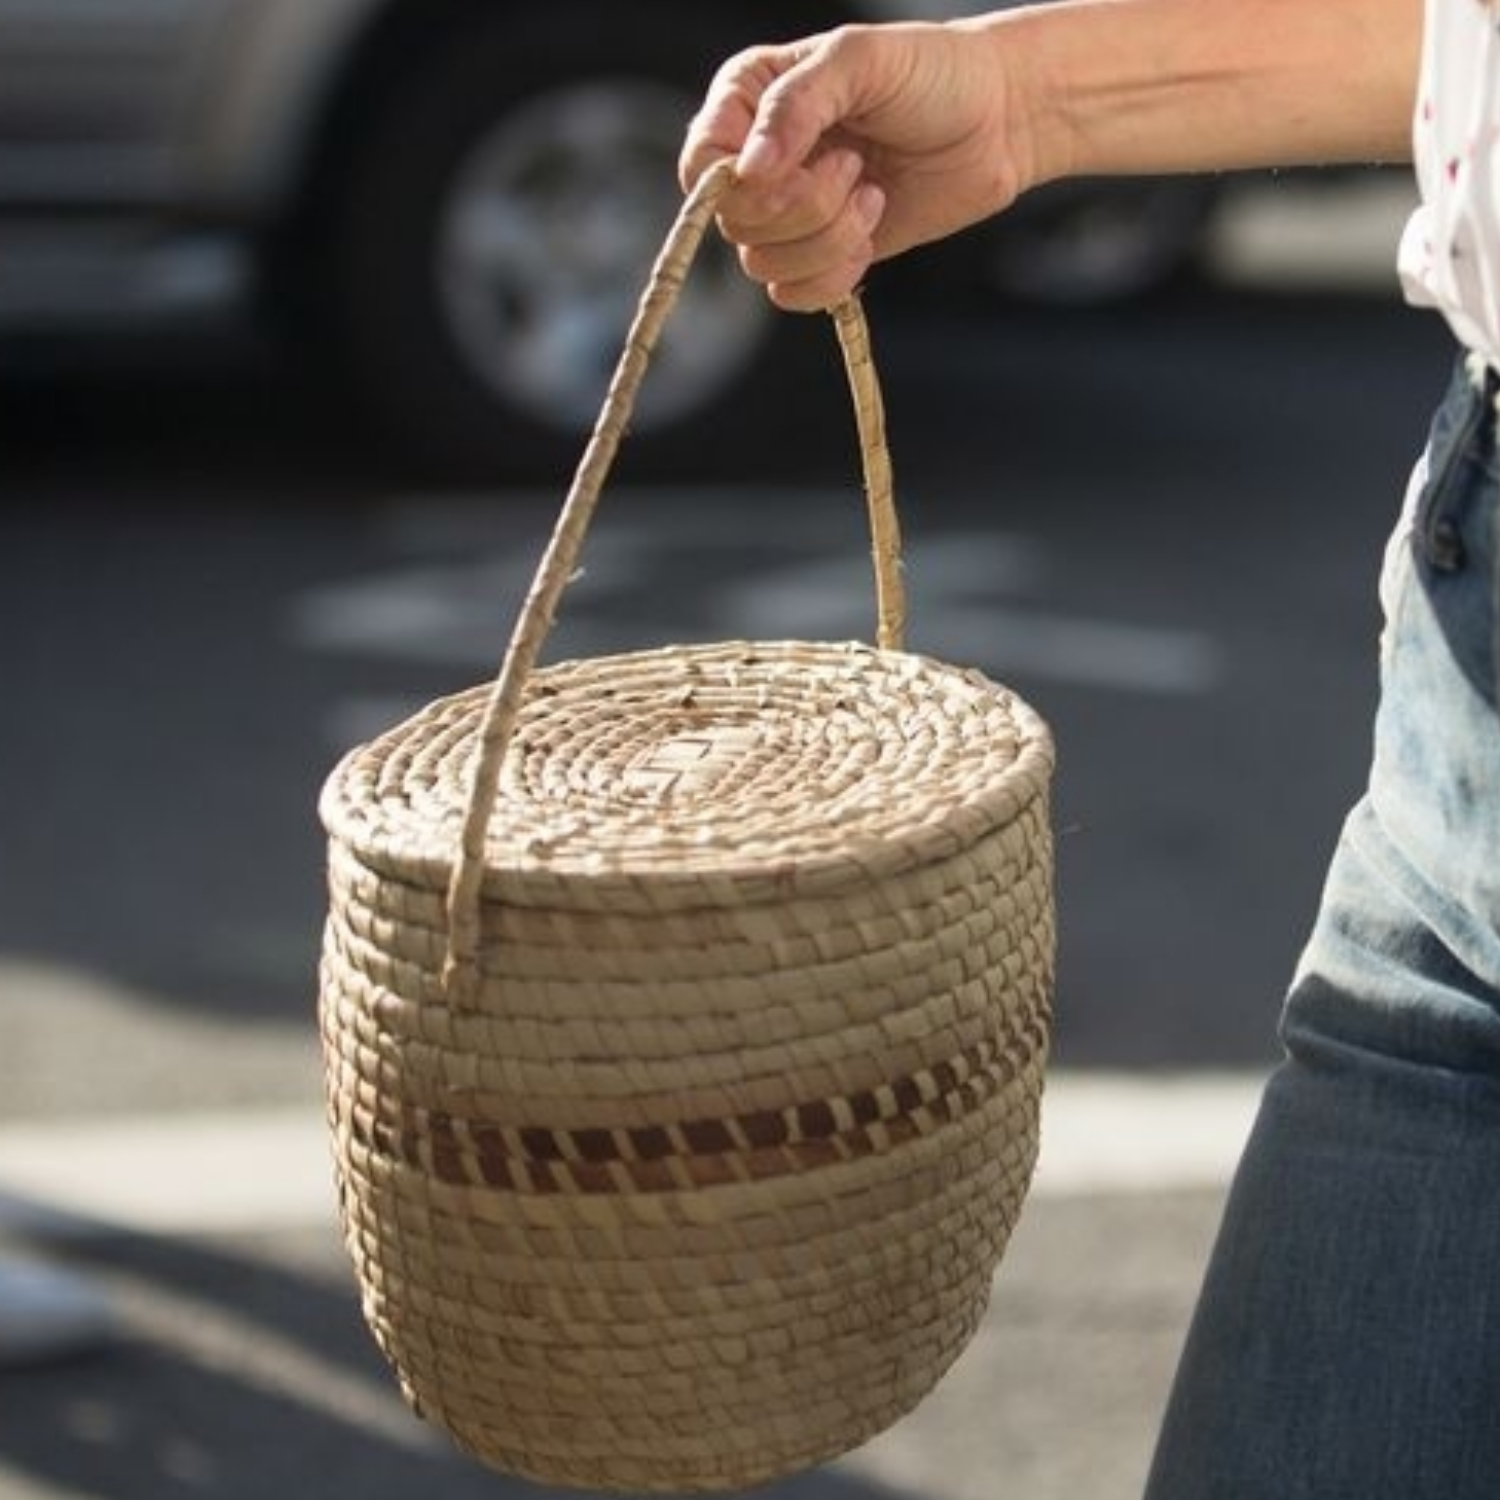 10 Chic Straw Bags For The Beach And Beyond - Harper's BAZAAR Malaysia